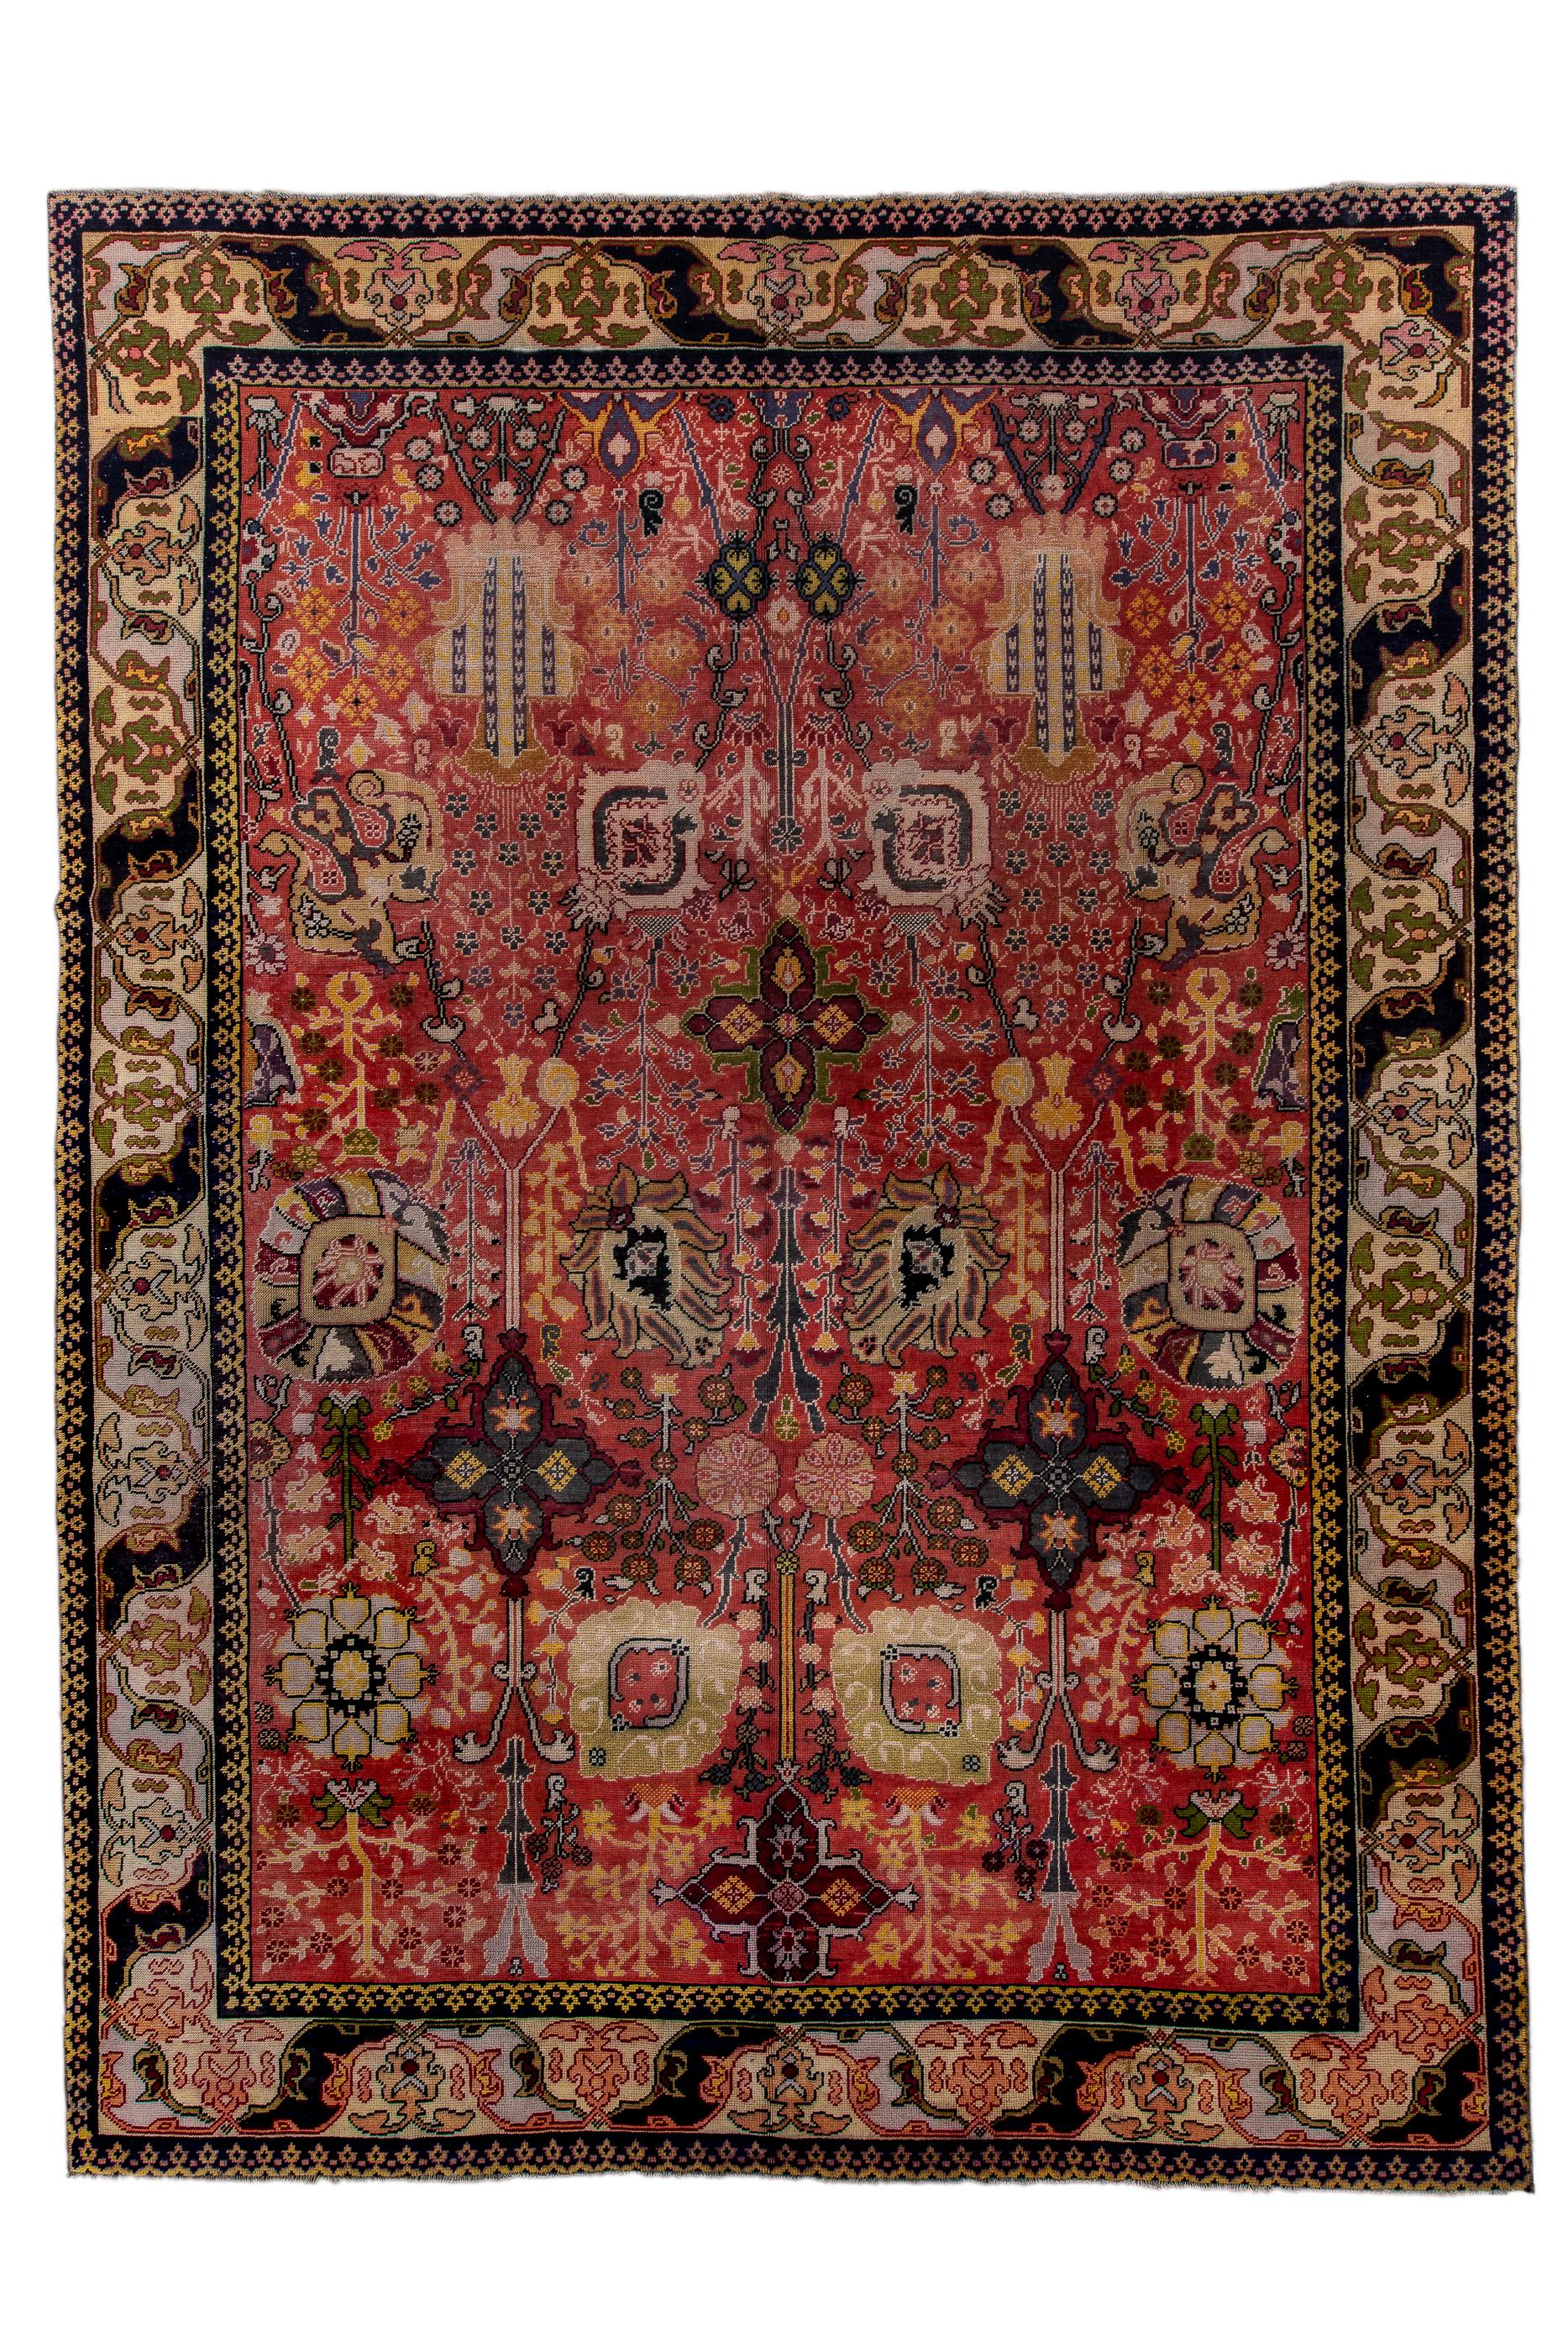 In a modified, Persianate “Vase carpet” design of oblique, banded oval palmettes, petal palmettes and  abstract iris amphora palmettes, all on a  Turkey red ground, this carpet was intended to compete, when new, with contemporaneous Persian rugs.